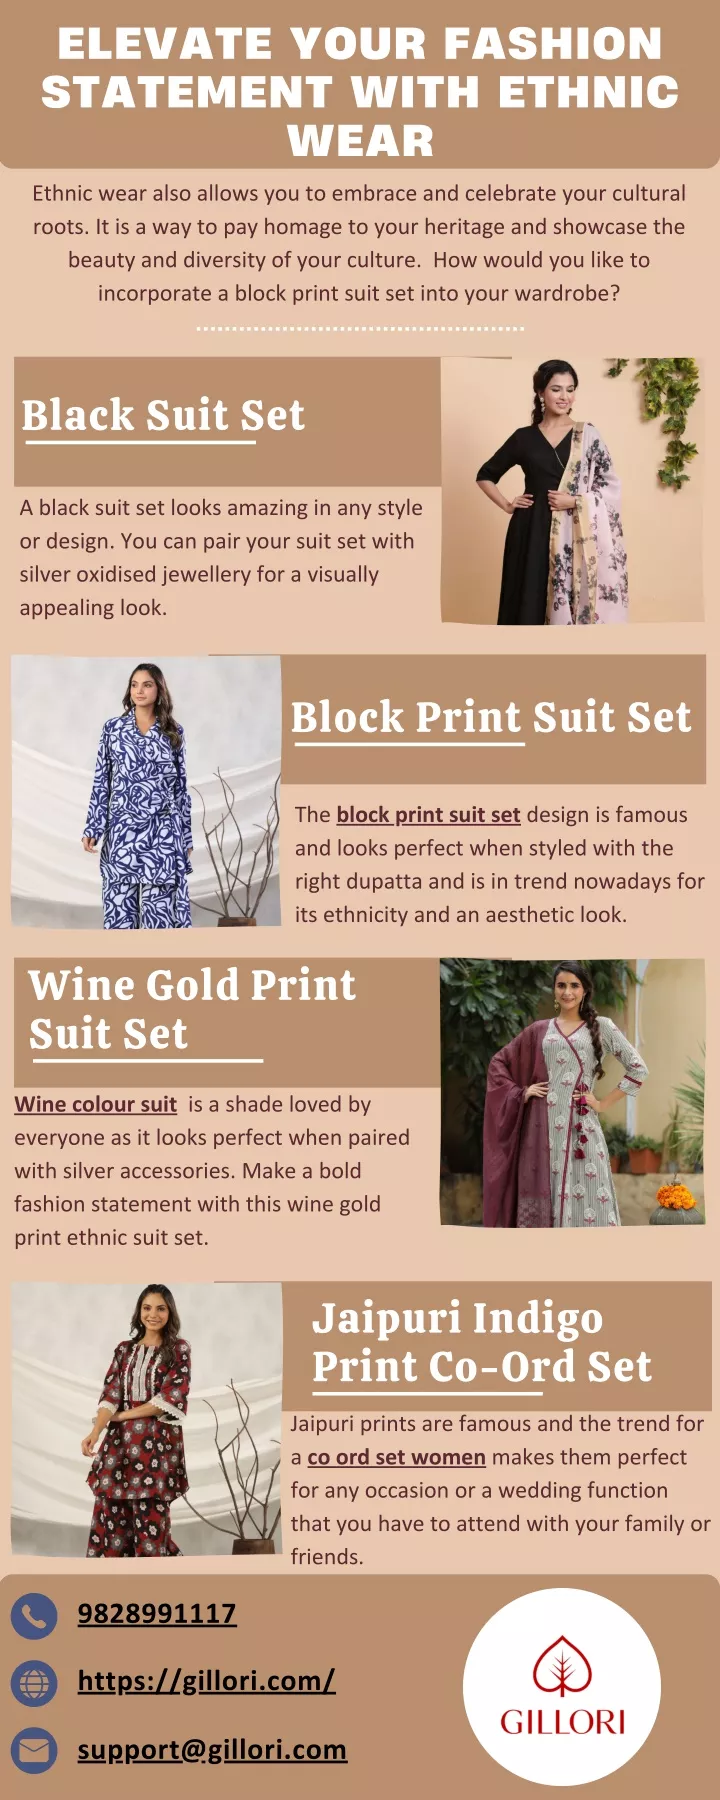 elevate your fashion statement with ethnic wear